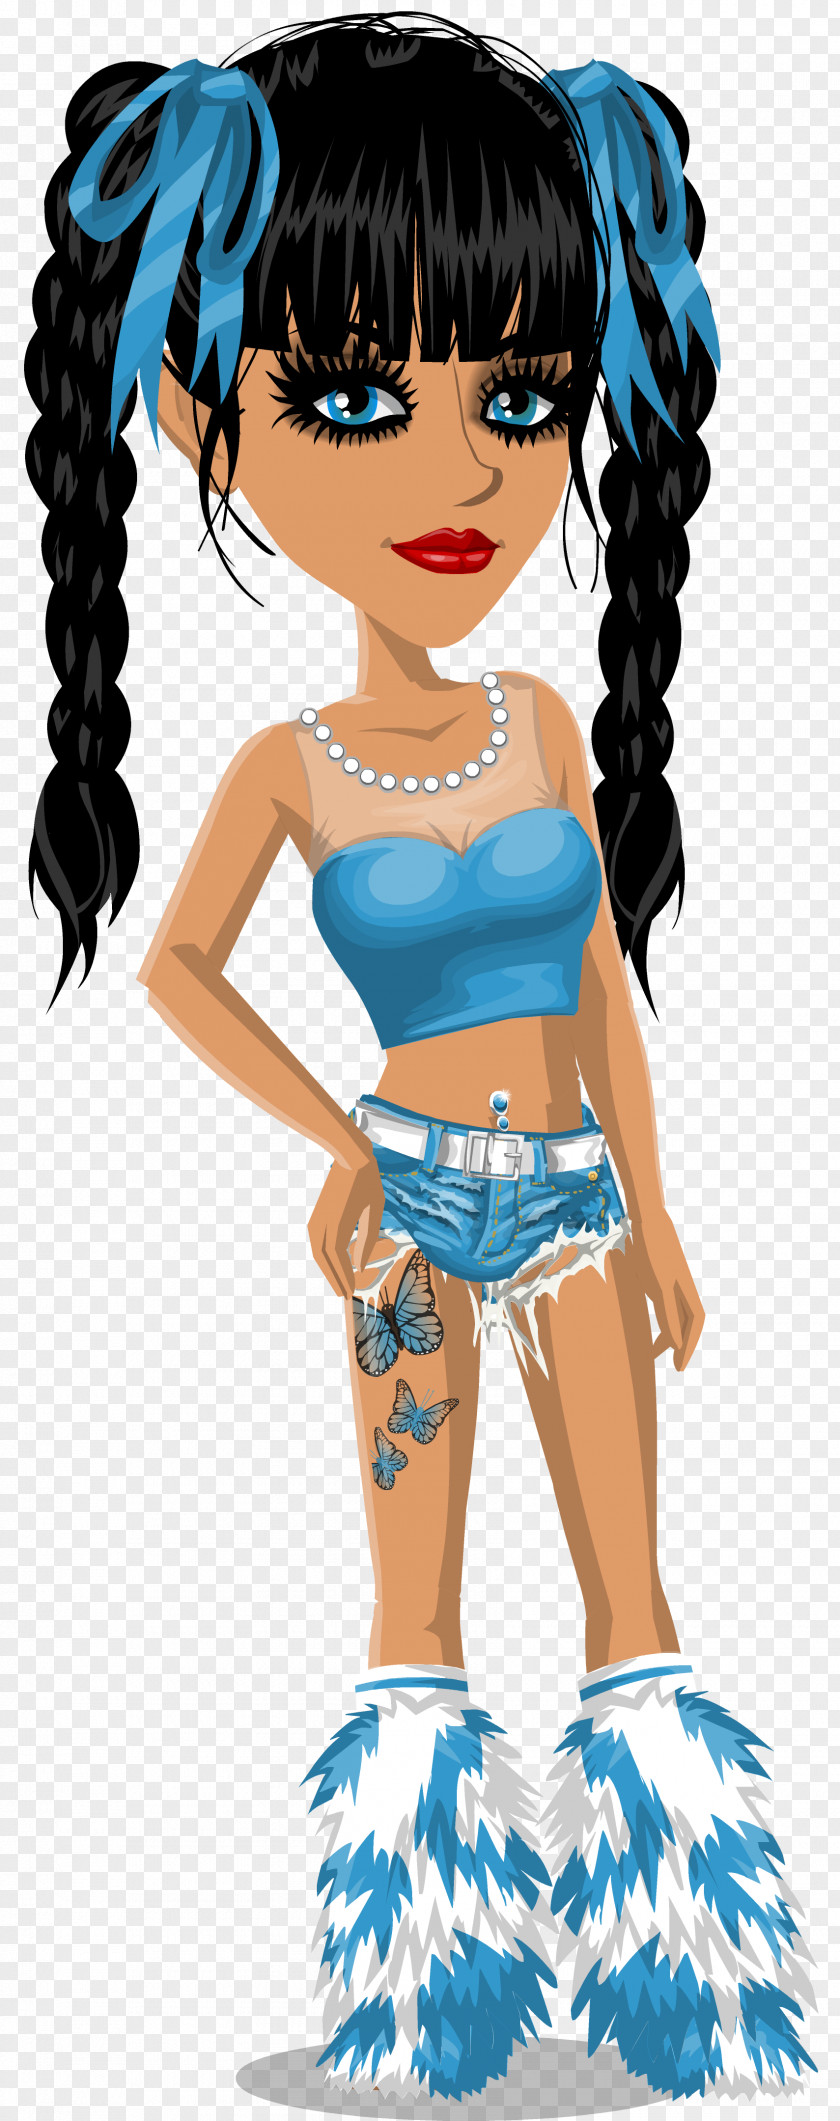 Youtube MovieStarPlanet YouTube Television Google Search PNG